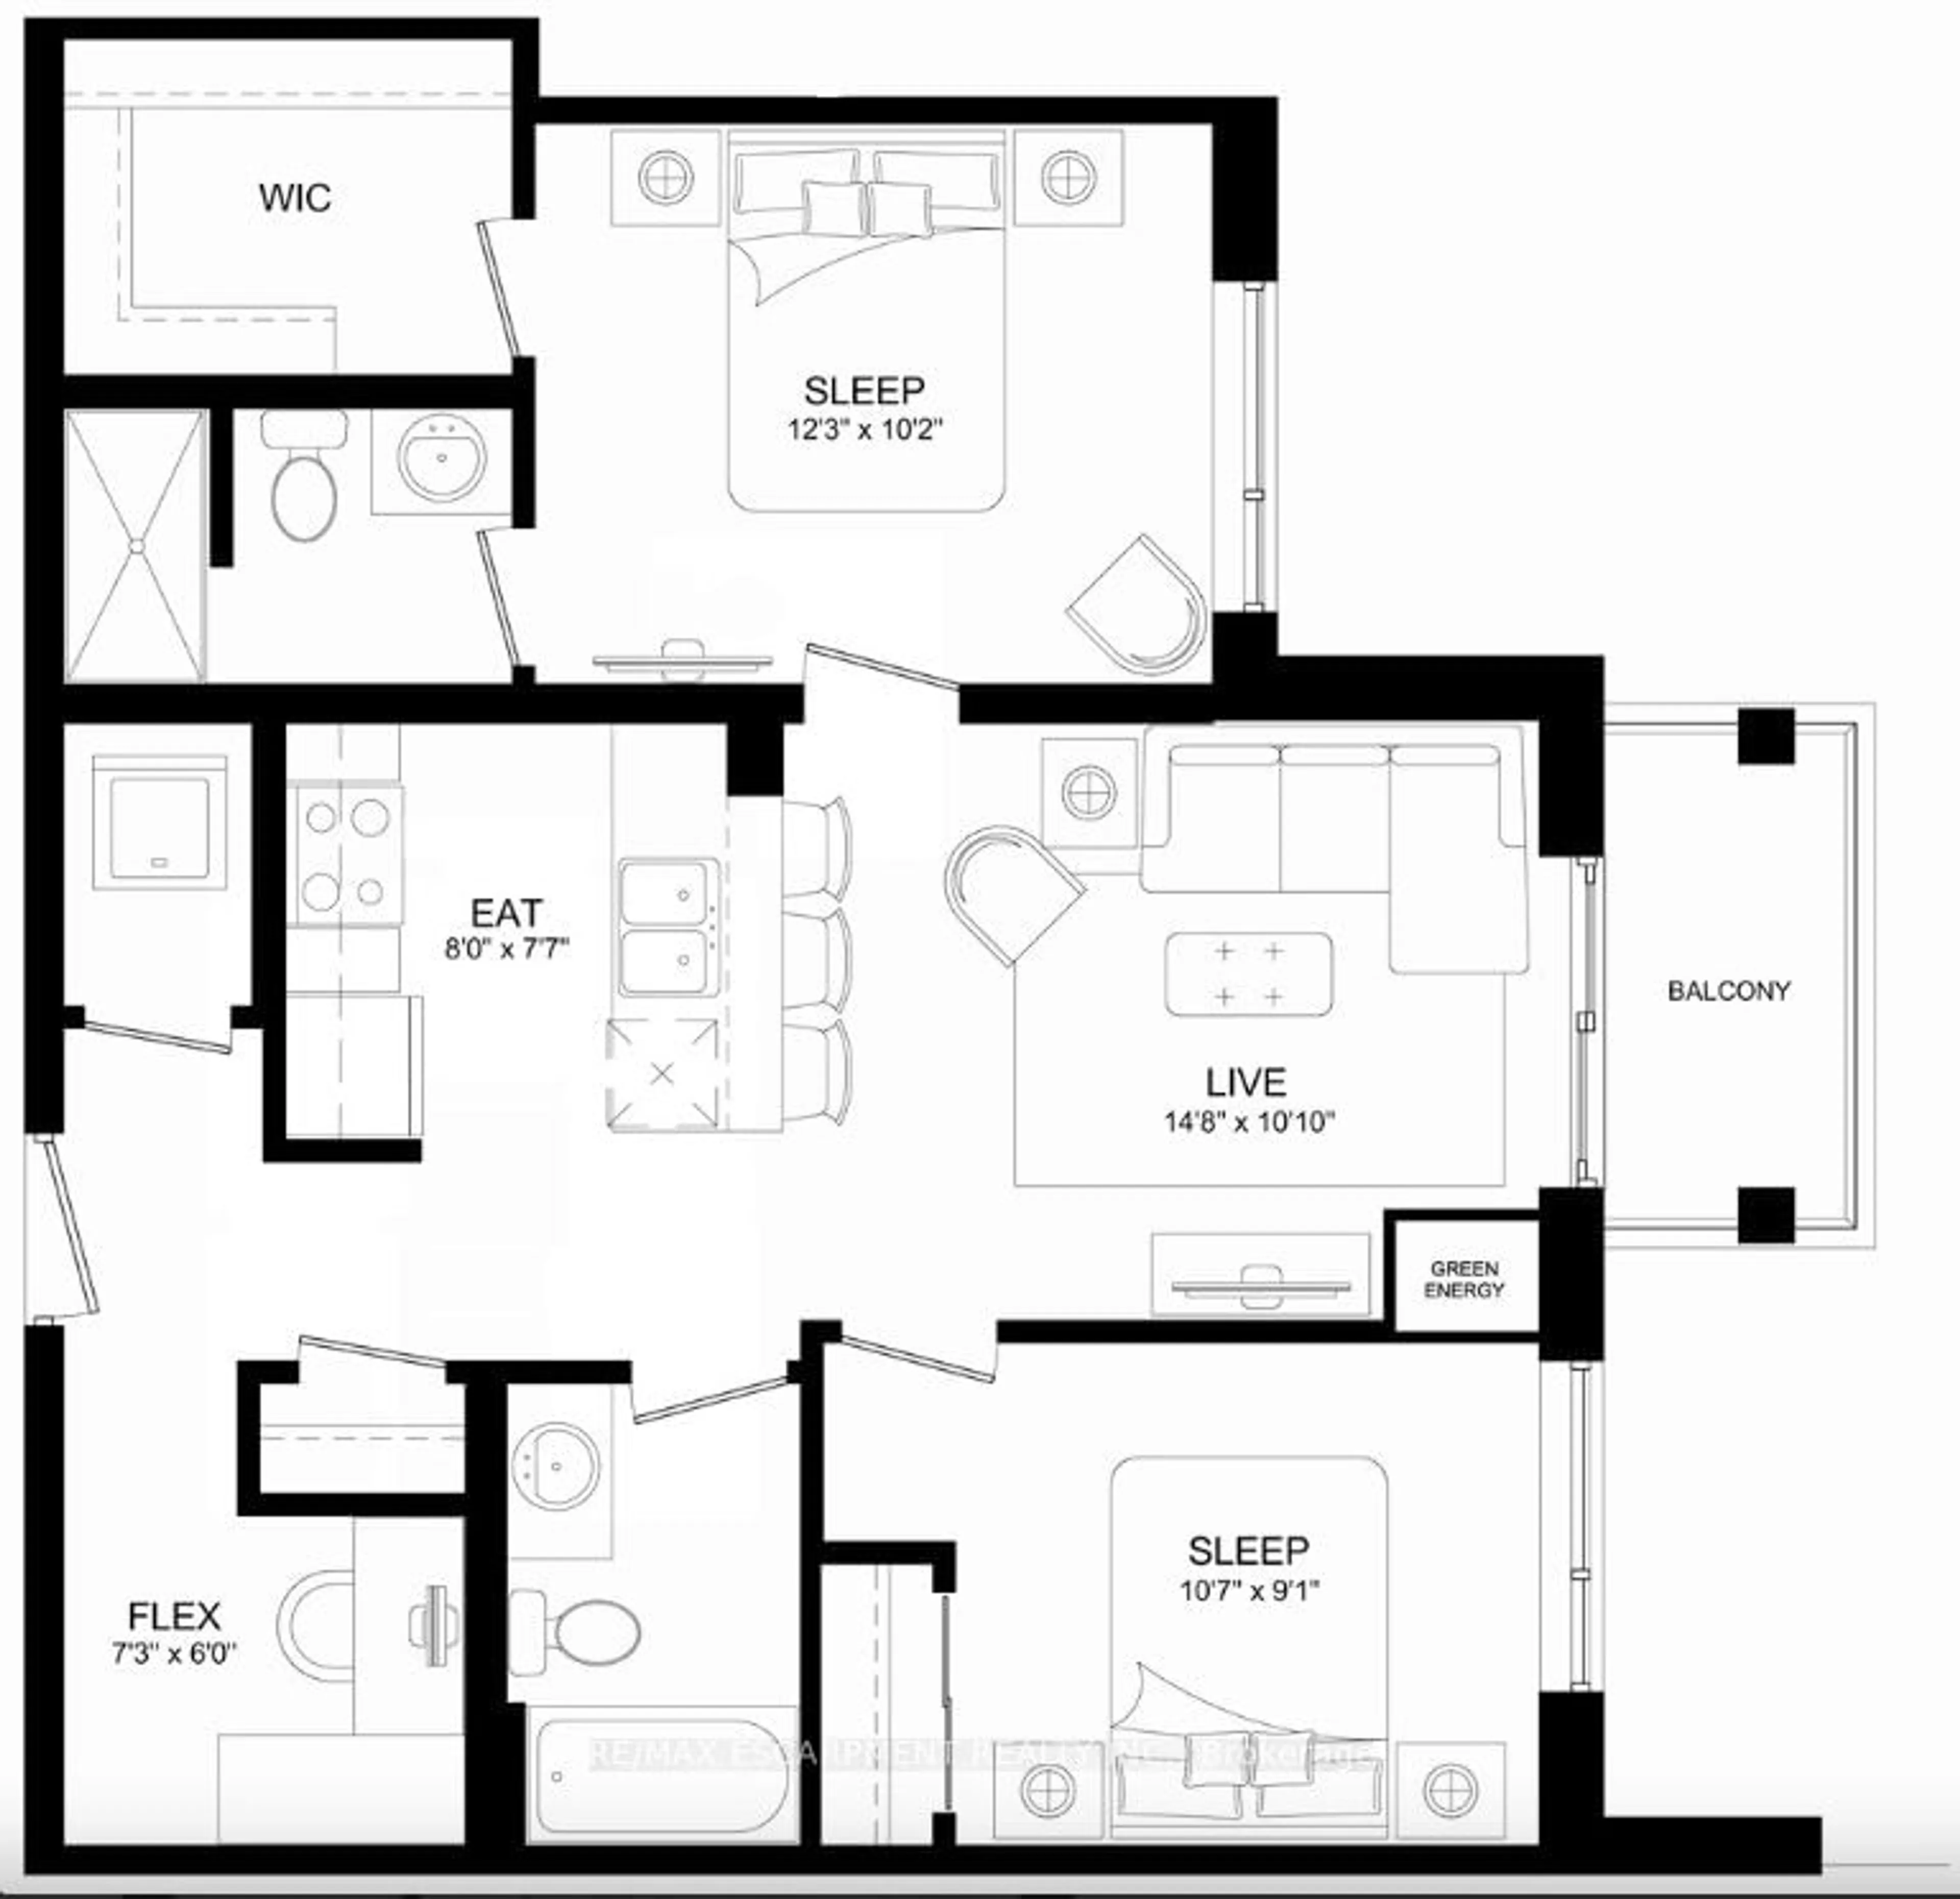 Floor plan for 5055 Greenlane Rd #634, West Lincoln Ontario L0R 1B3